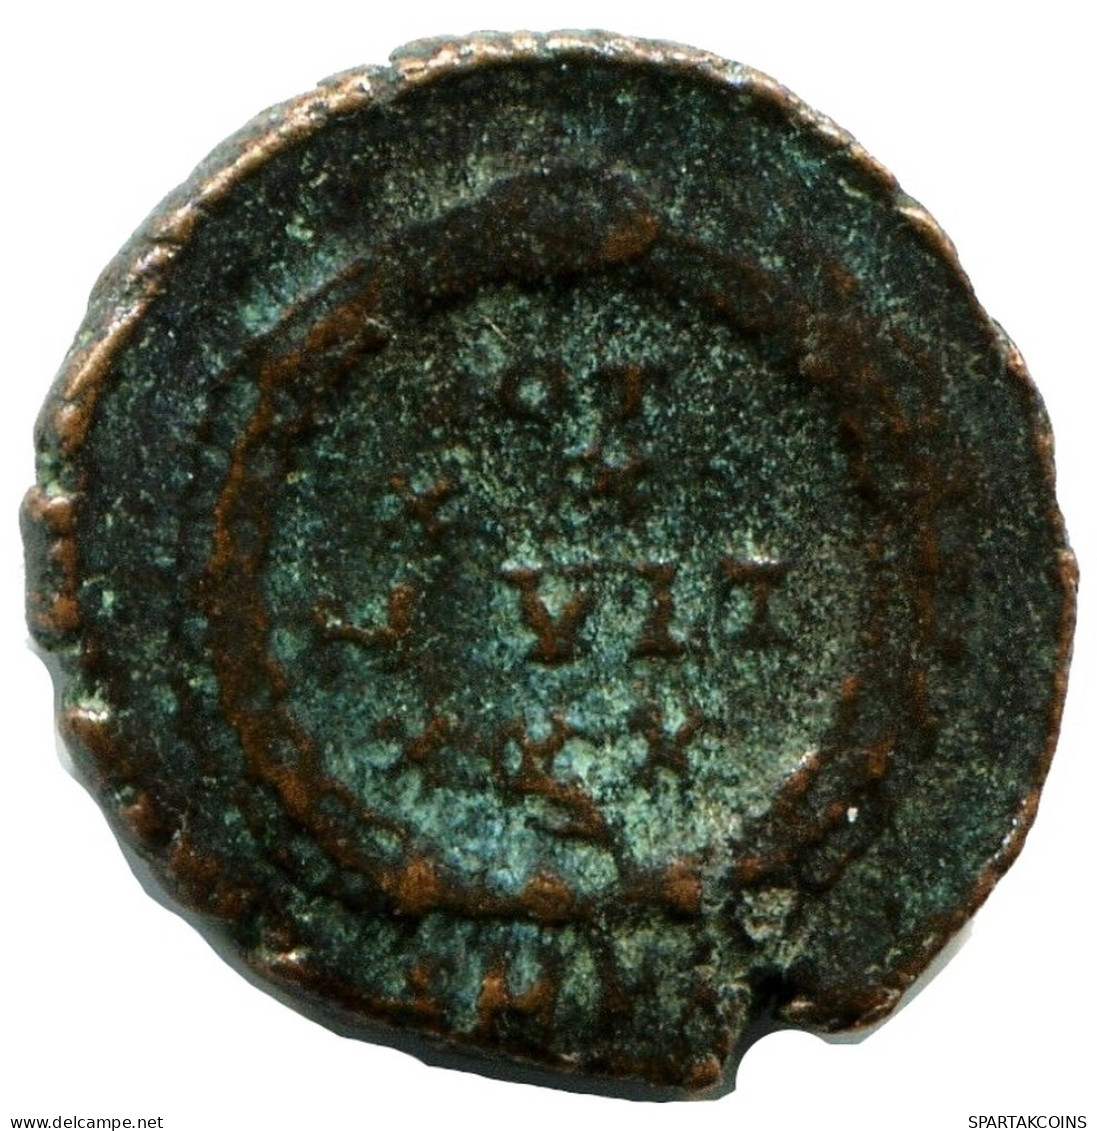 CONSTANS MINTED IN CYZICUS FOUND IN IHNASYAH HOARD EGYPT #ANC11702.14.D.A - The Christian Empire (307 AD To 363 AD)